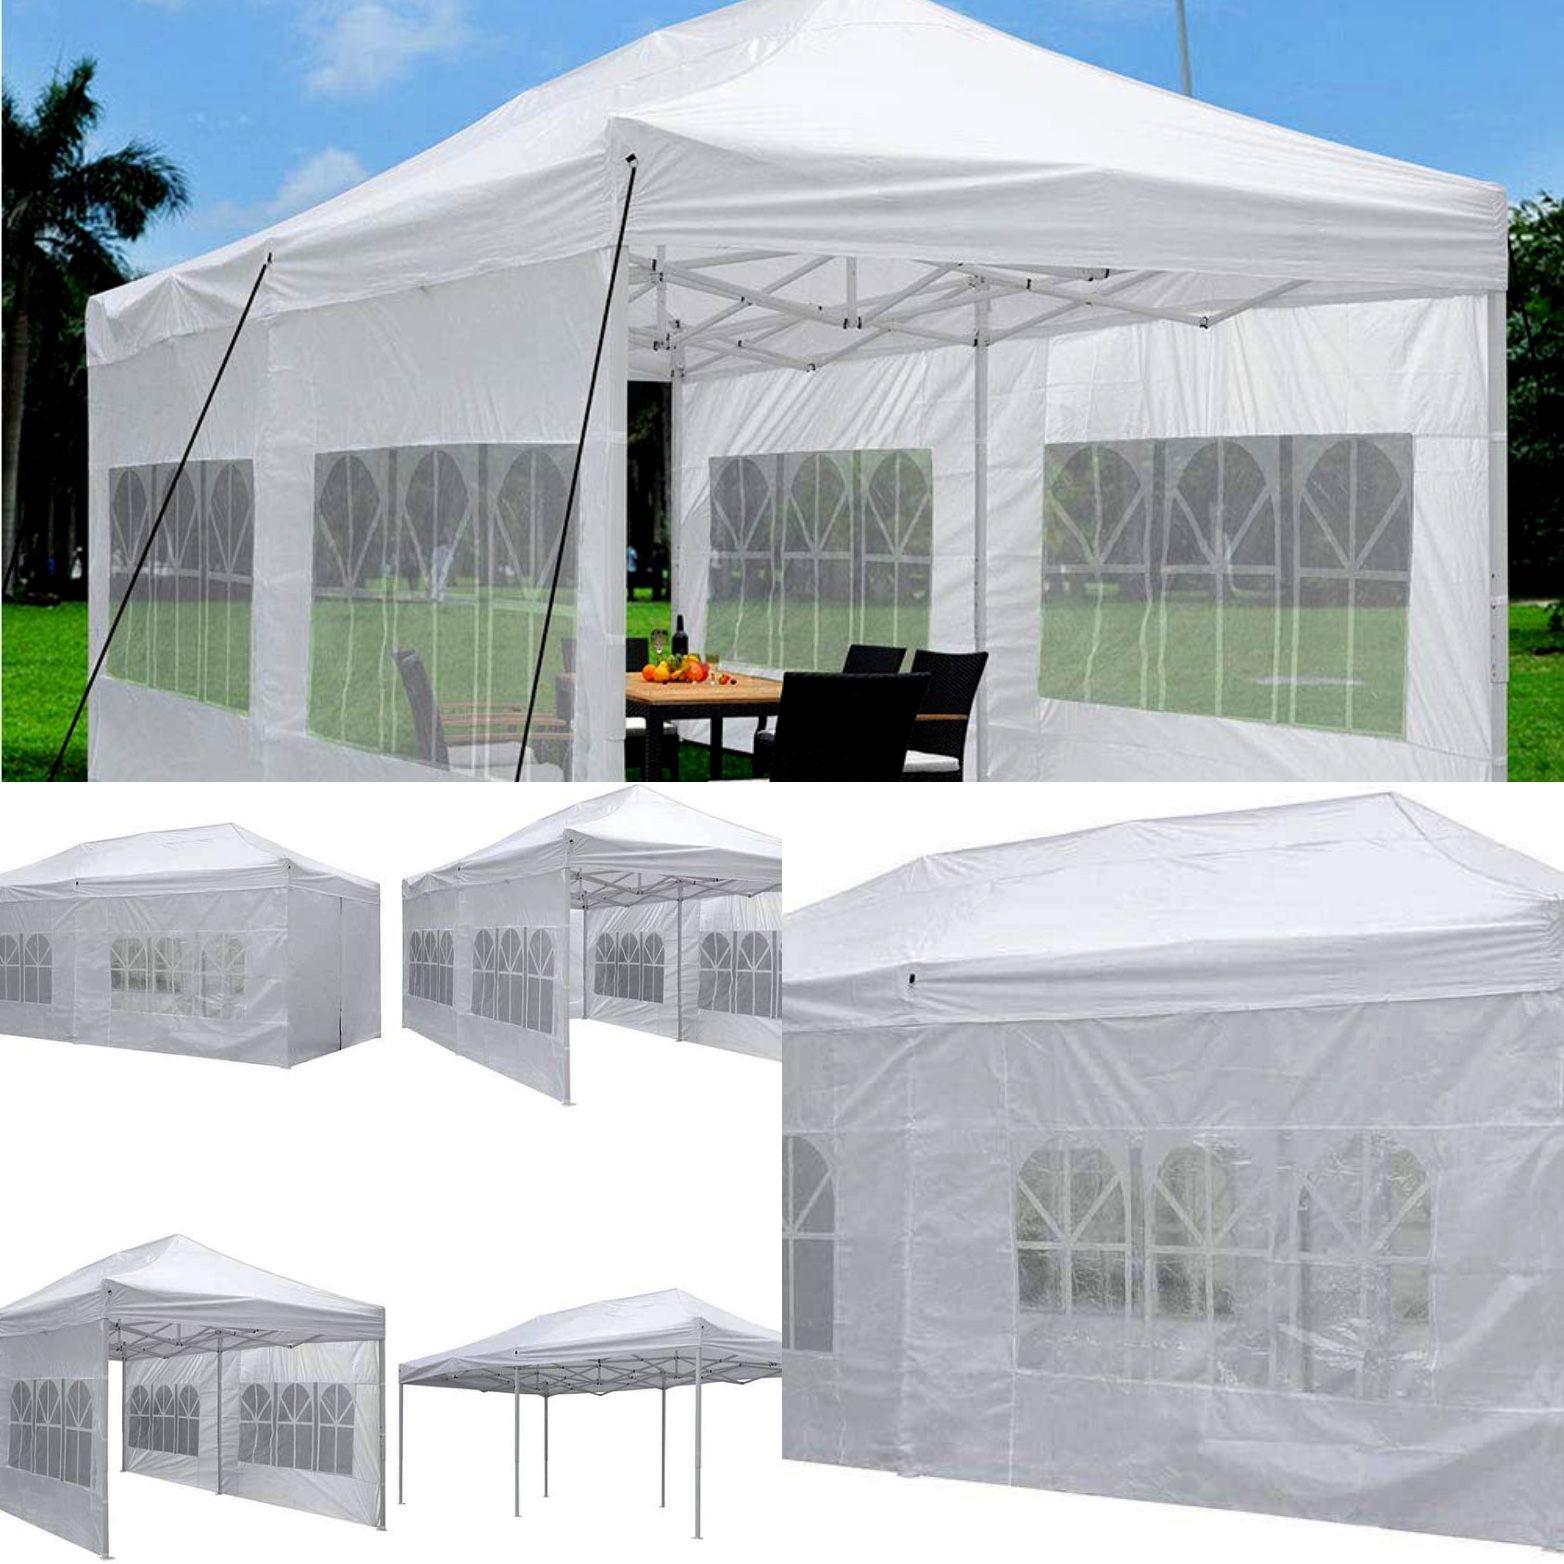 NEW Outdoor WHITE  10x20 ft, 10 x 20, Party Canopy Camping Carpa Shelter Shade Tarp Cover Tent with Side Walls. DETAILS on Description 